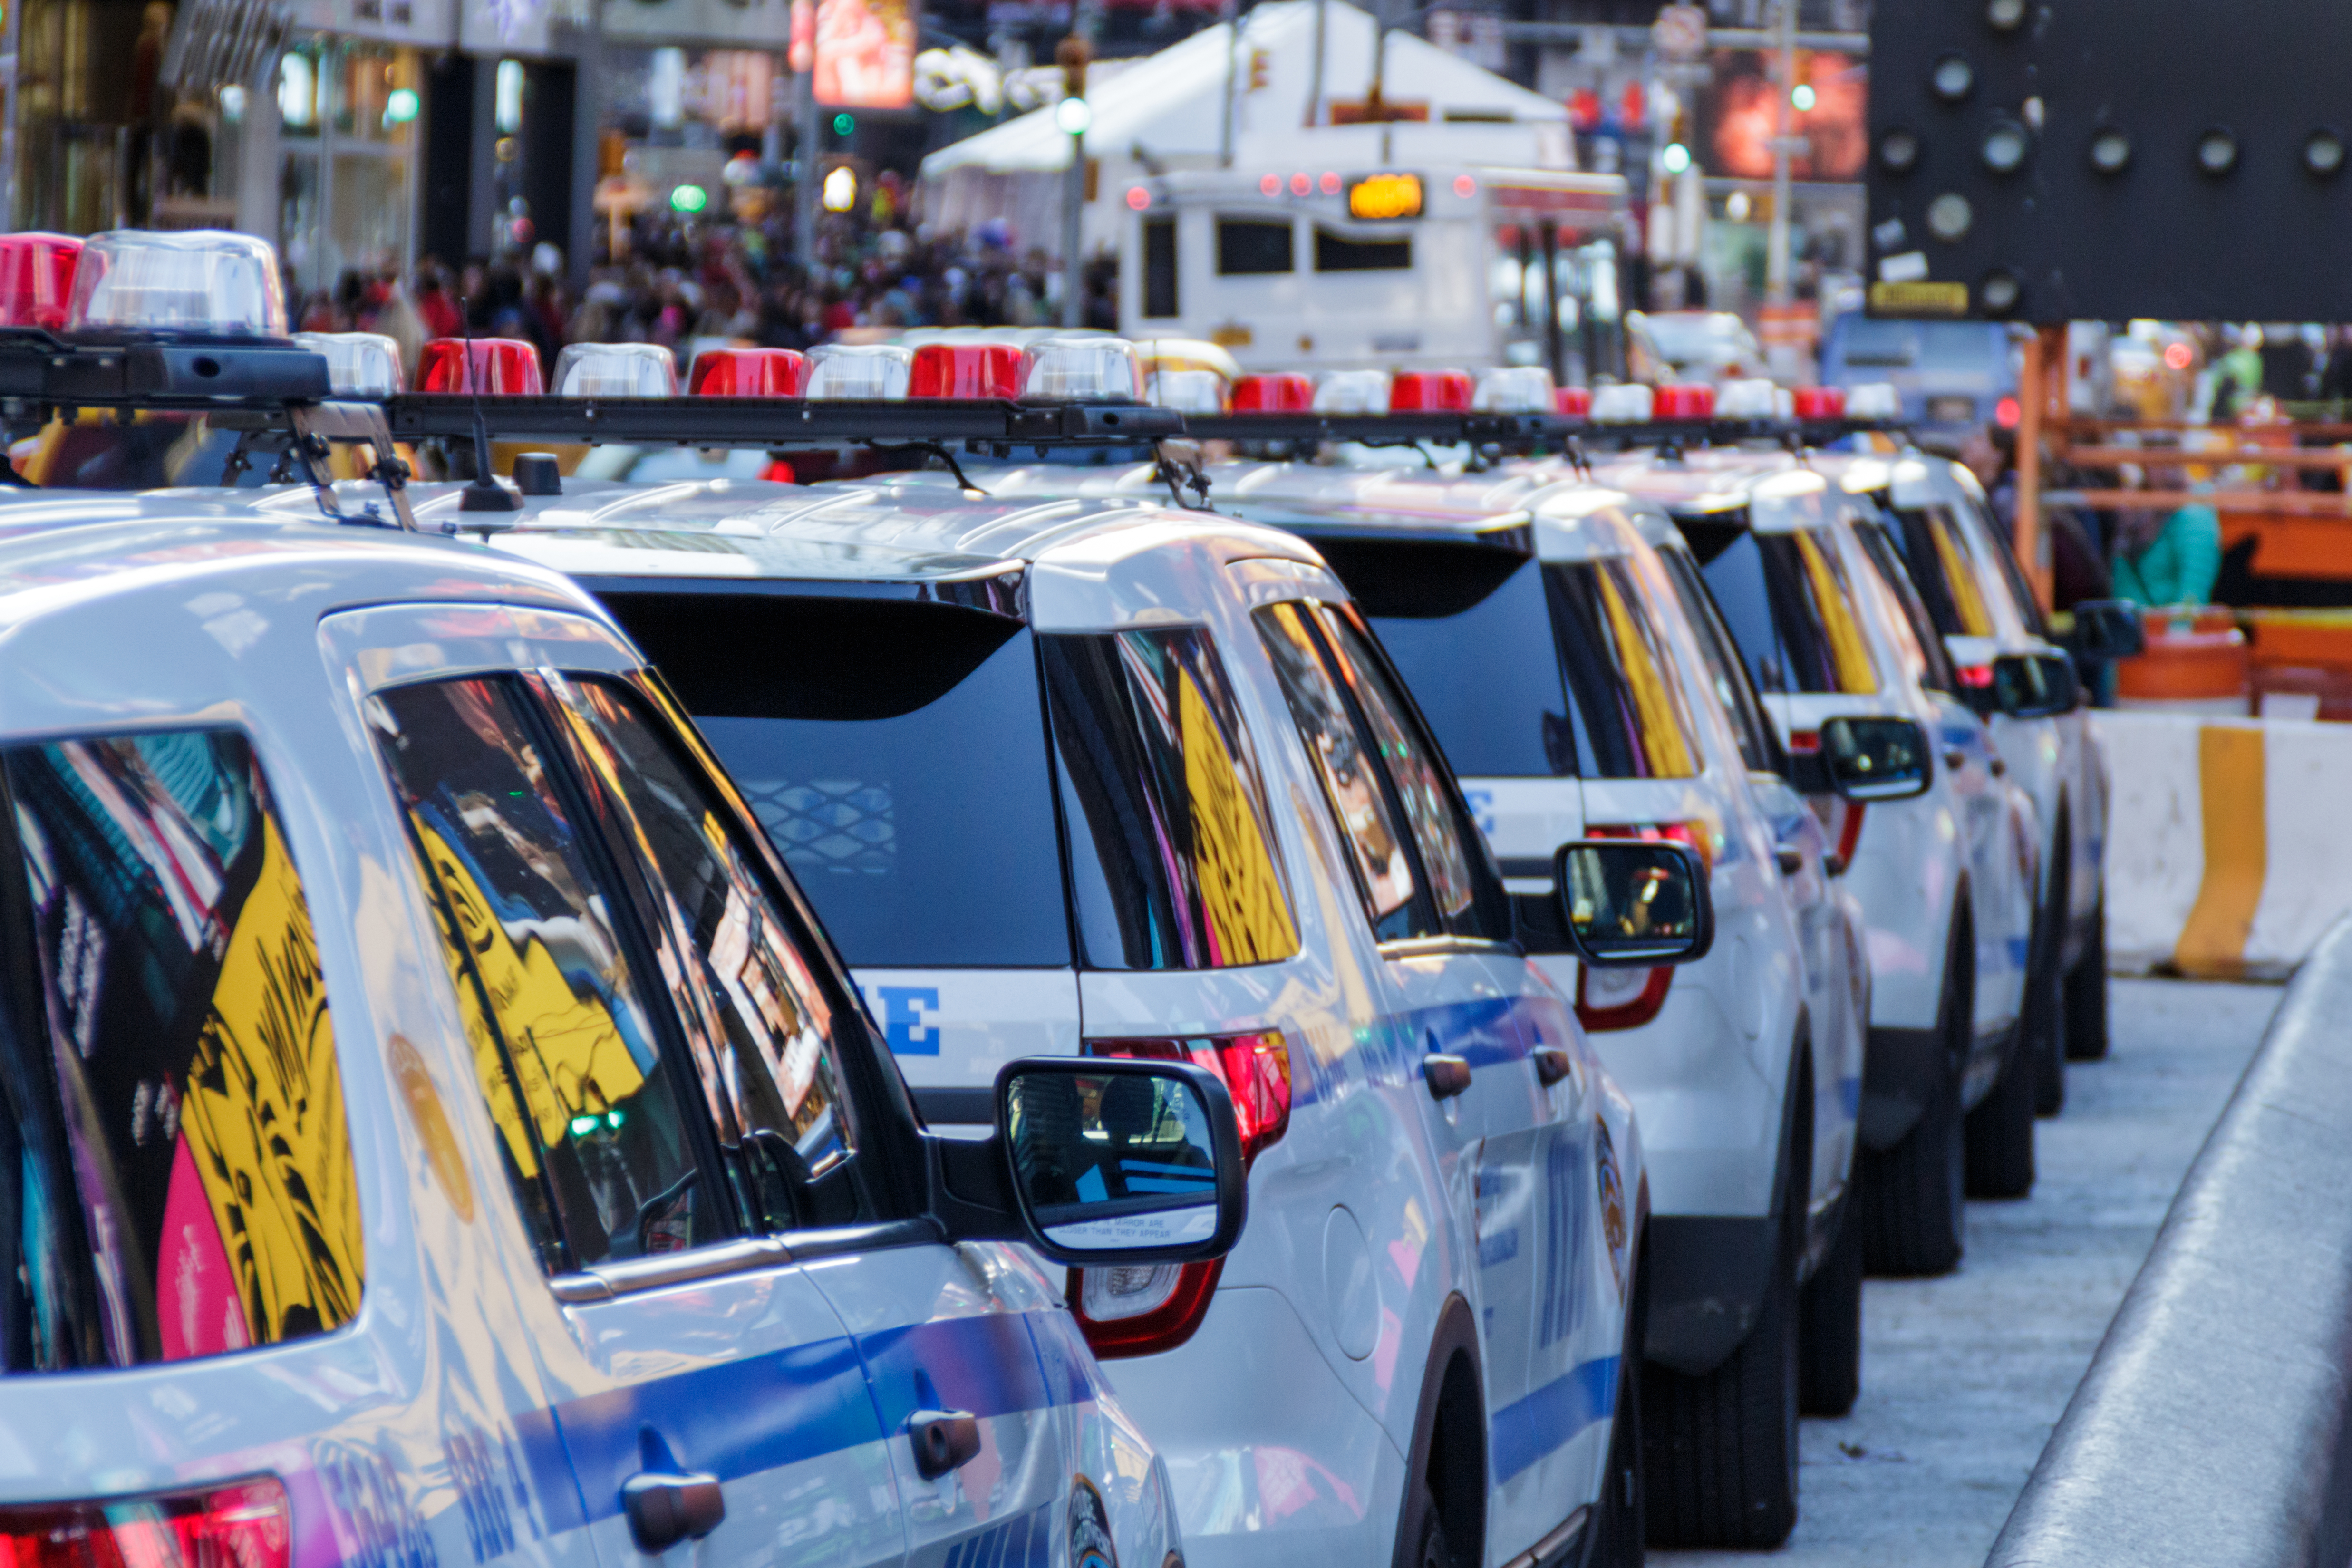 Four NYC Police cars are parked along a busy NYC street.